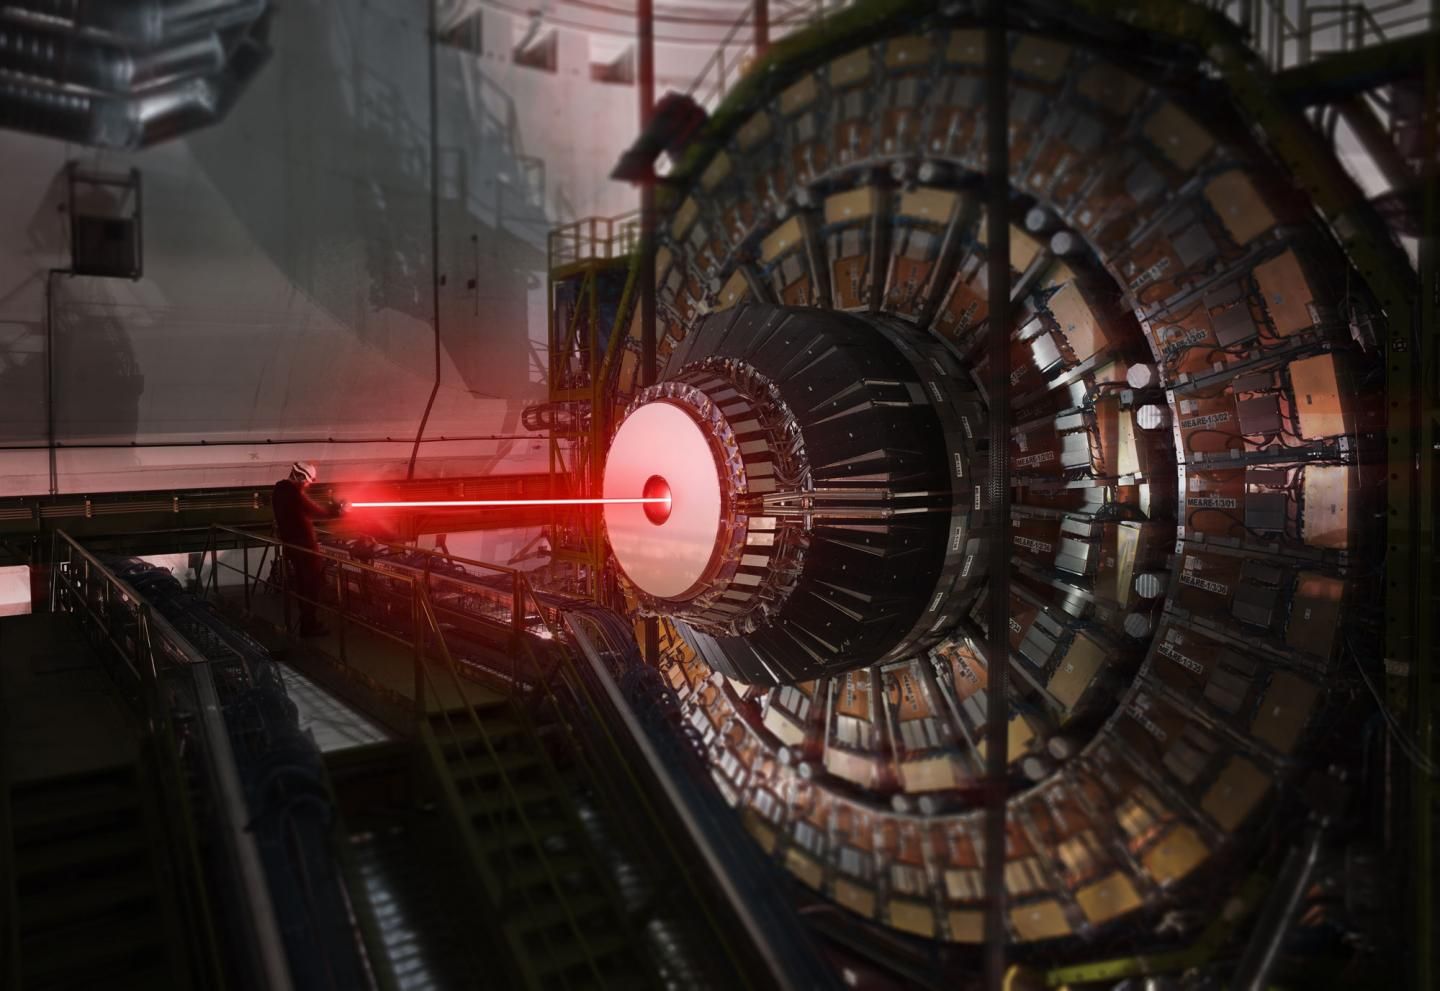 CERN (European Organization for Nuclear Research) has announced the development of a project for search and test if it's possible to leave the spacetime and physics and reach a post-physical and post-spacetime level of observation and explore what's beyon